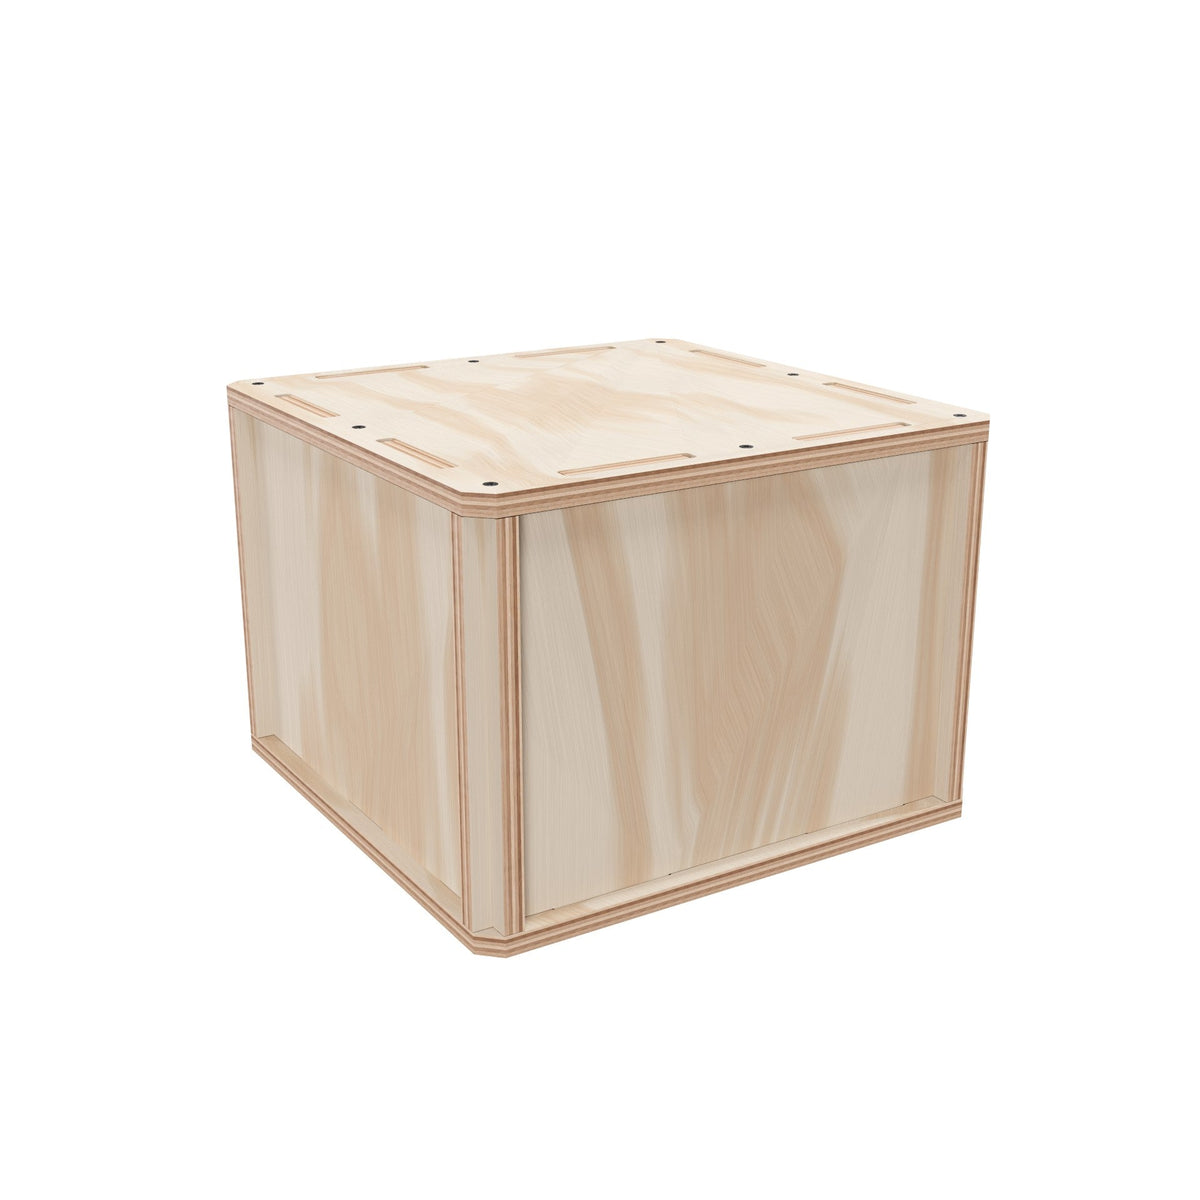 Plywood Shipping Crate 14x14x10